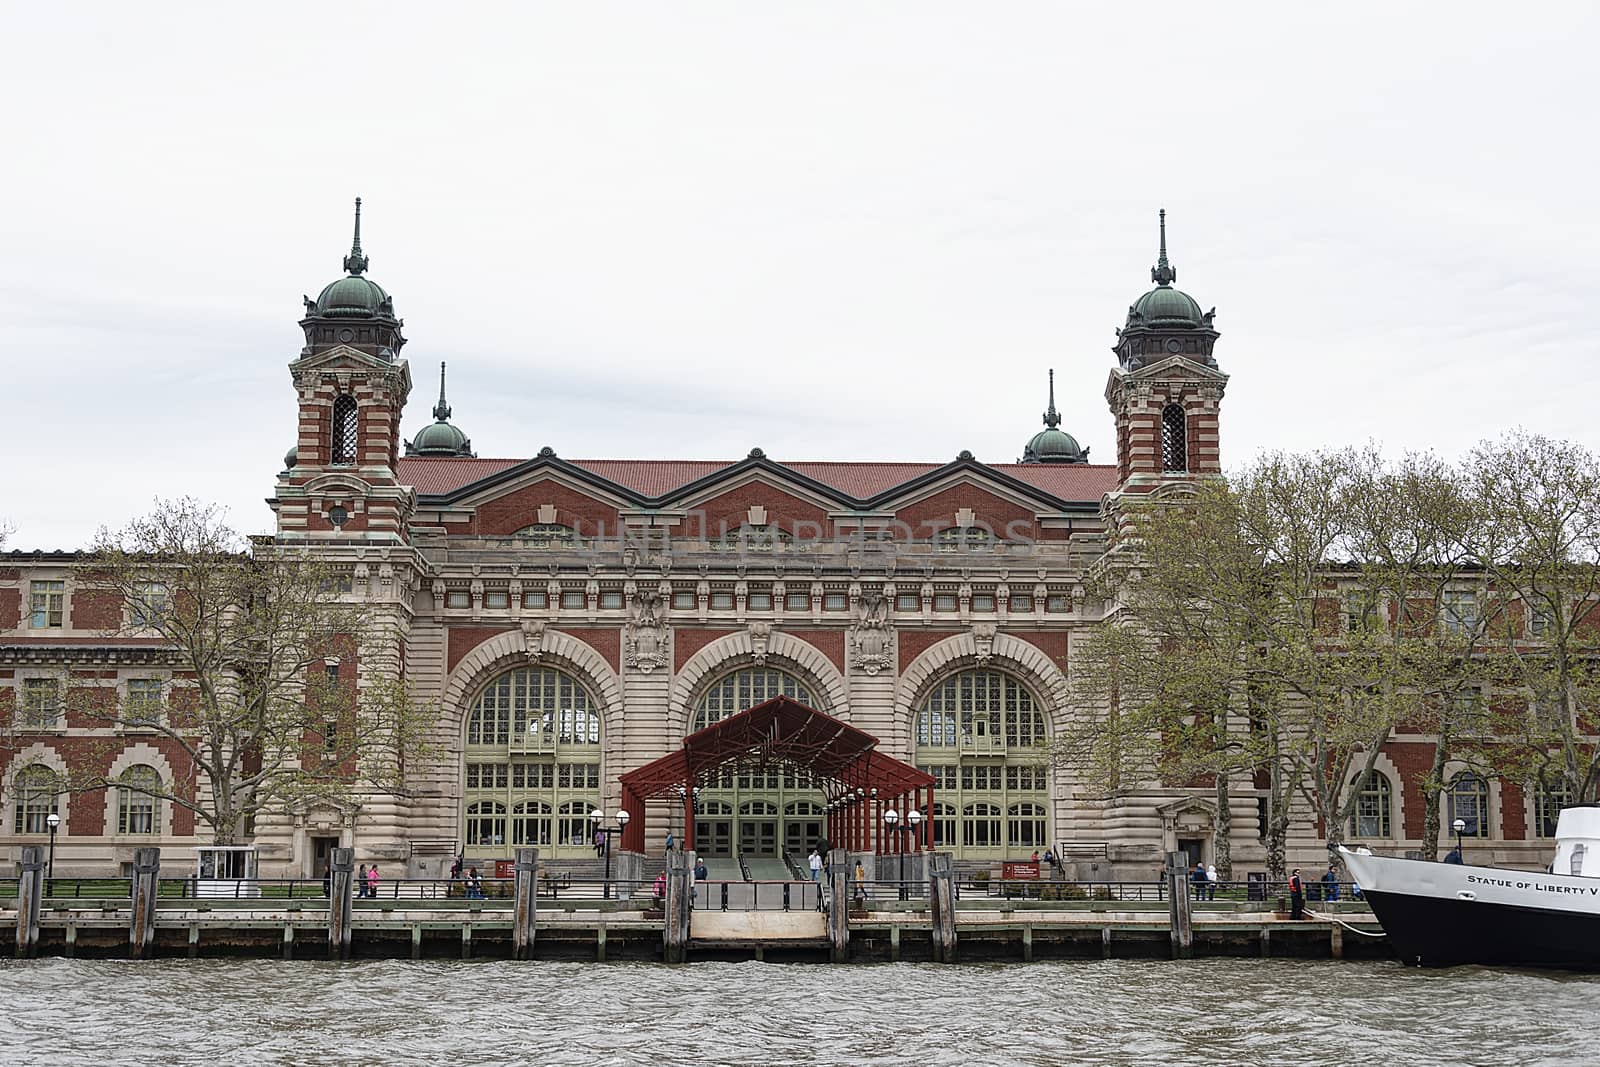 USA, New York, Ellis Island - May 2019: Arriving at Ellis Island Visitor Centre and Museum